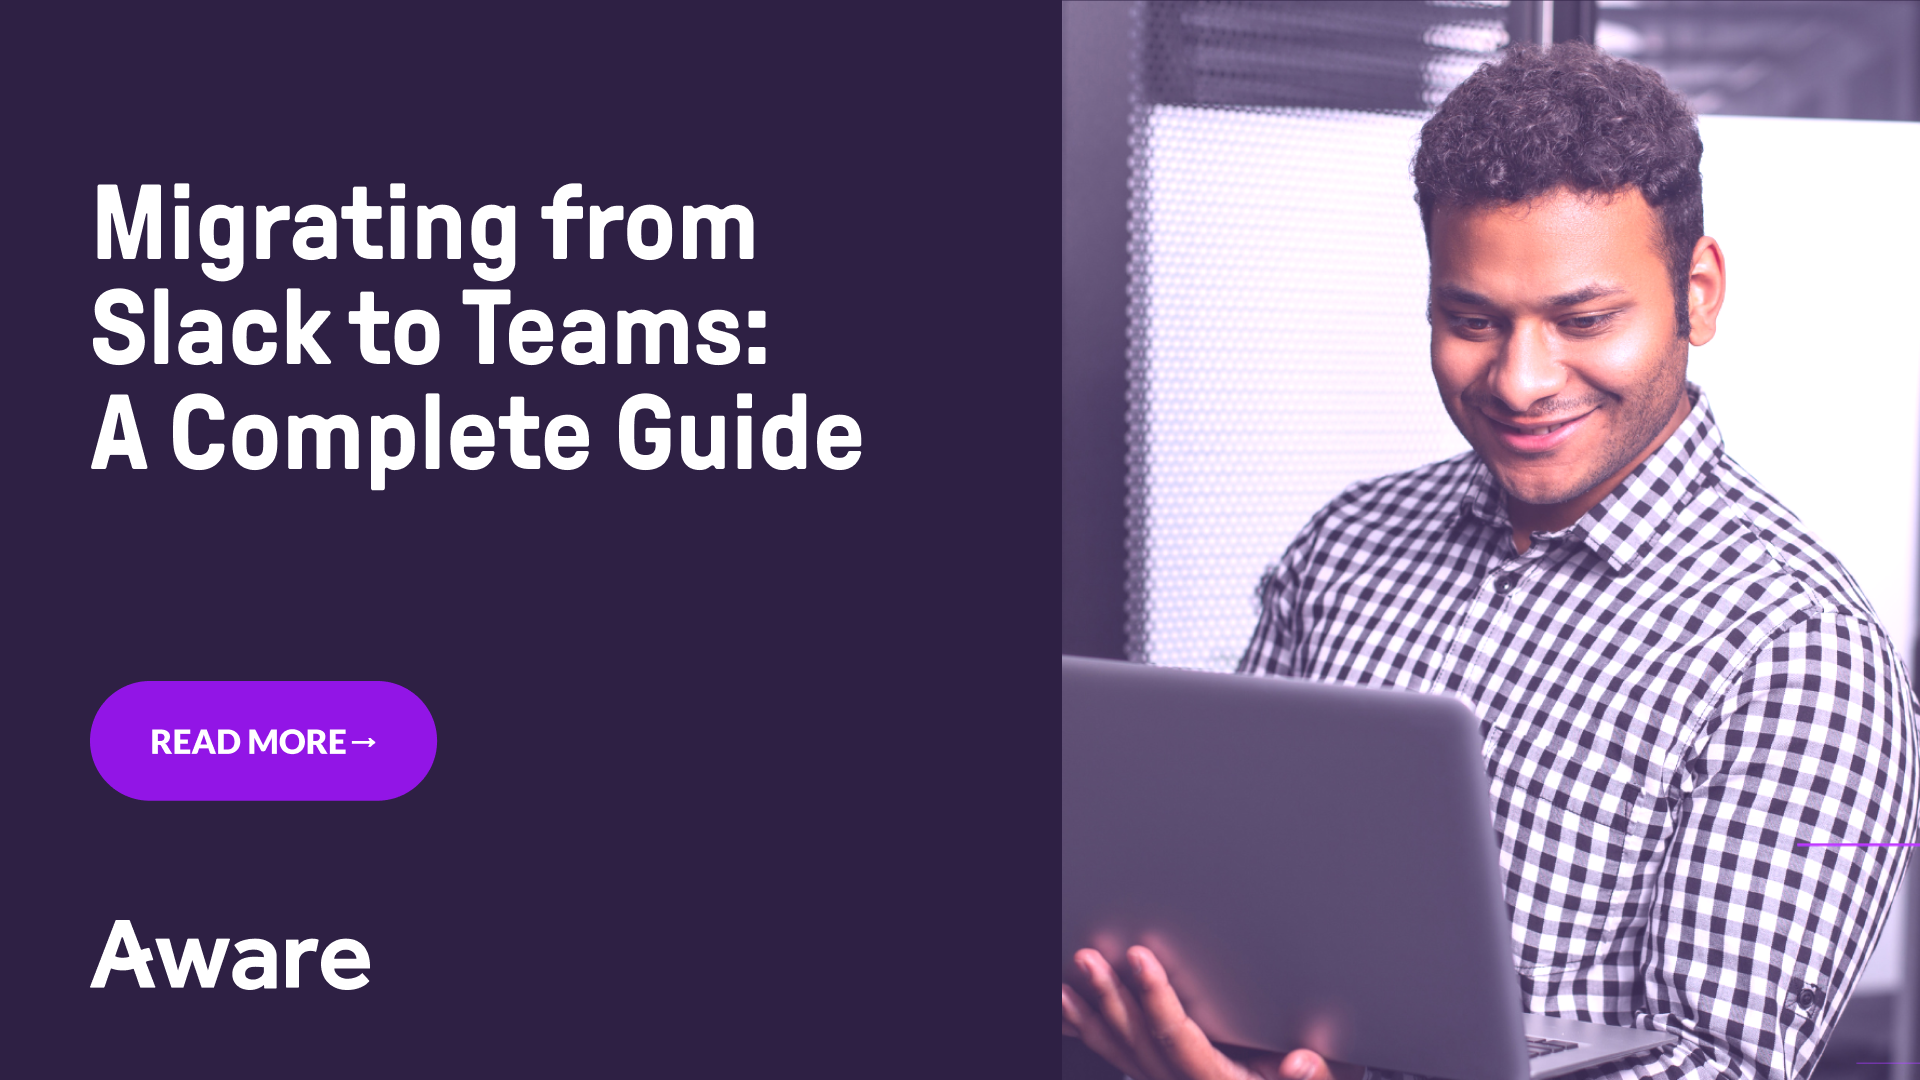 Migrating from Slack to Teams: A Complete Guide